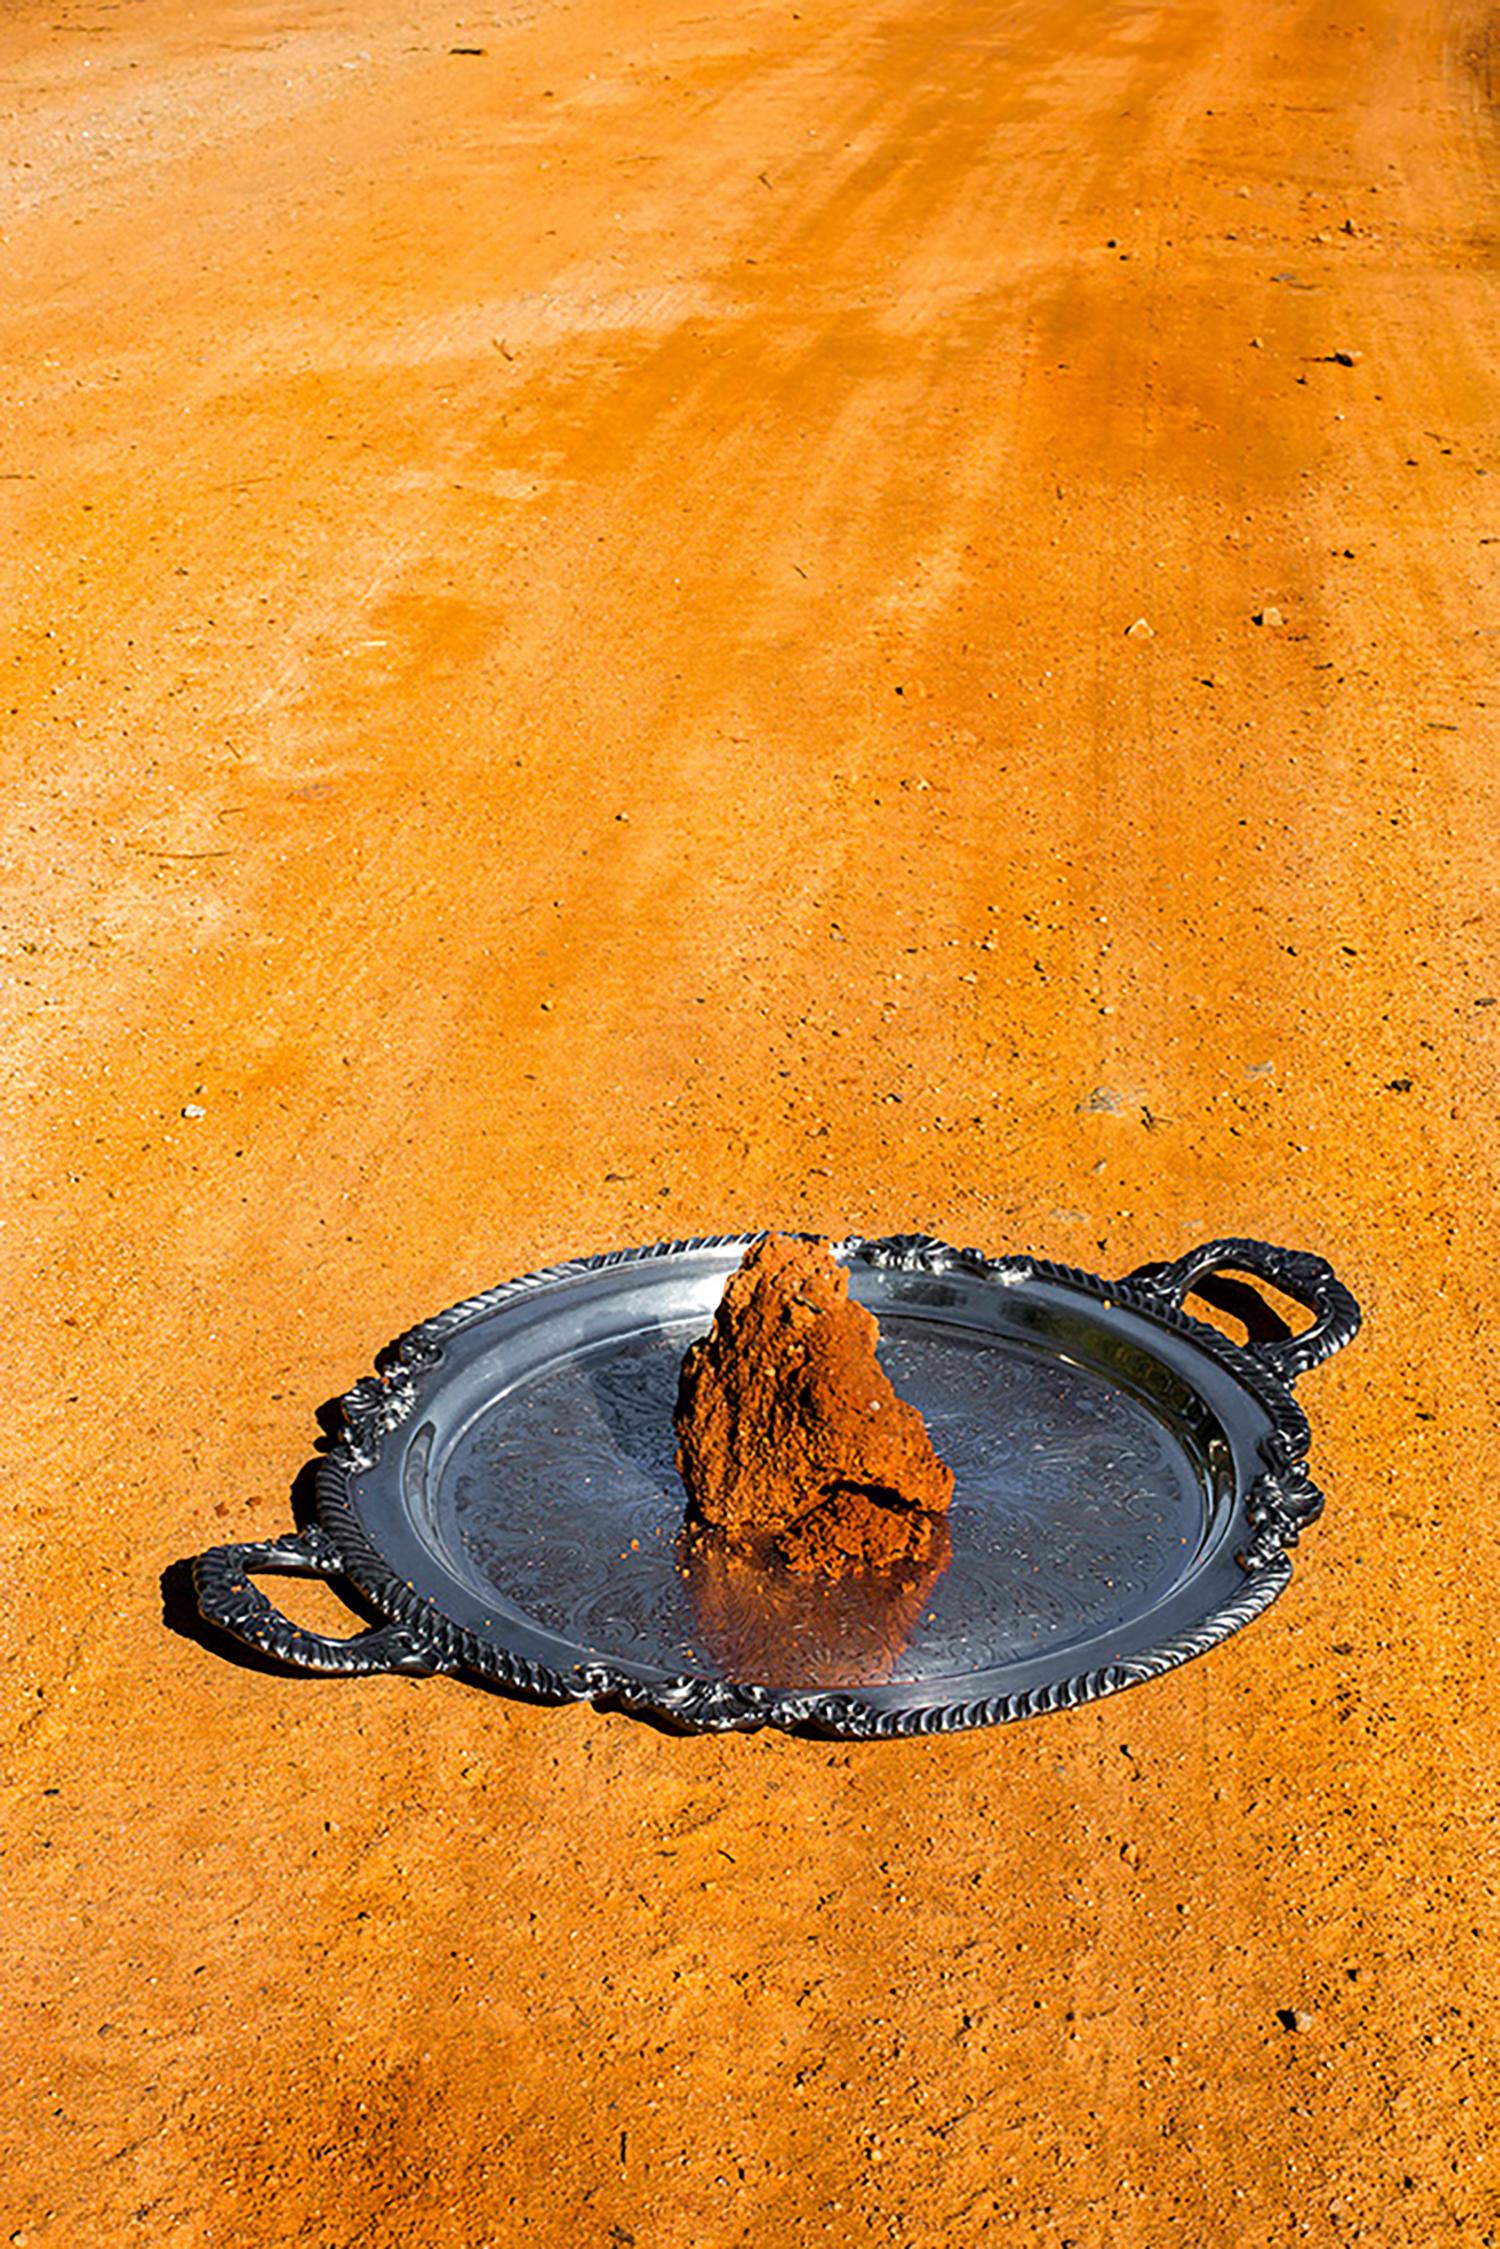 Shannon Davis Color Photograph - "Kin" - Southern, red clay, landscape, silver platter, still life photography